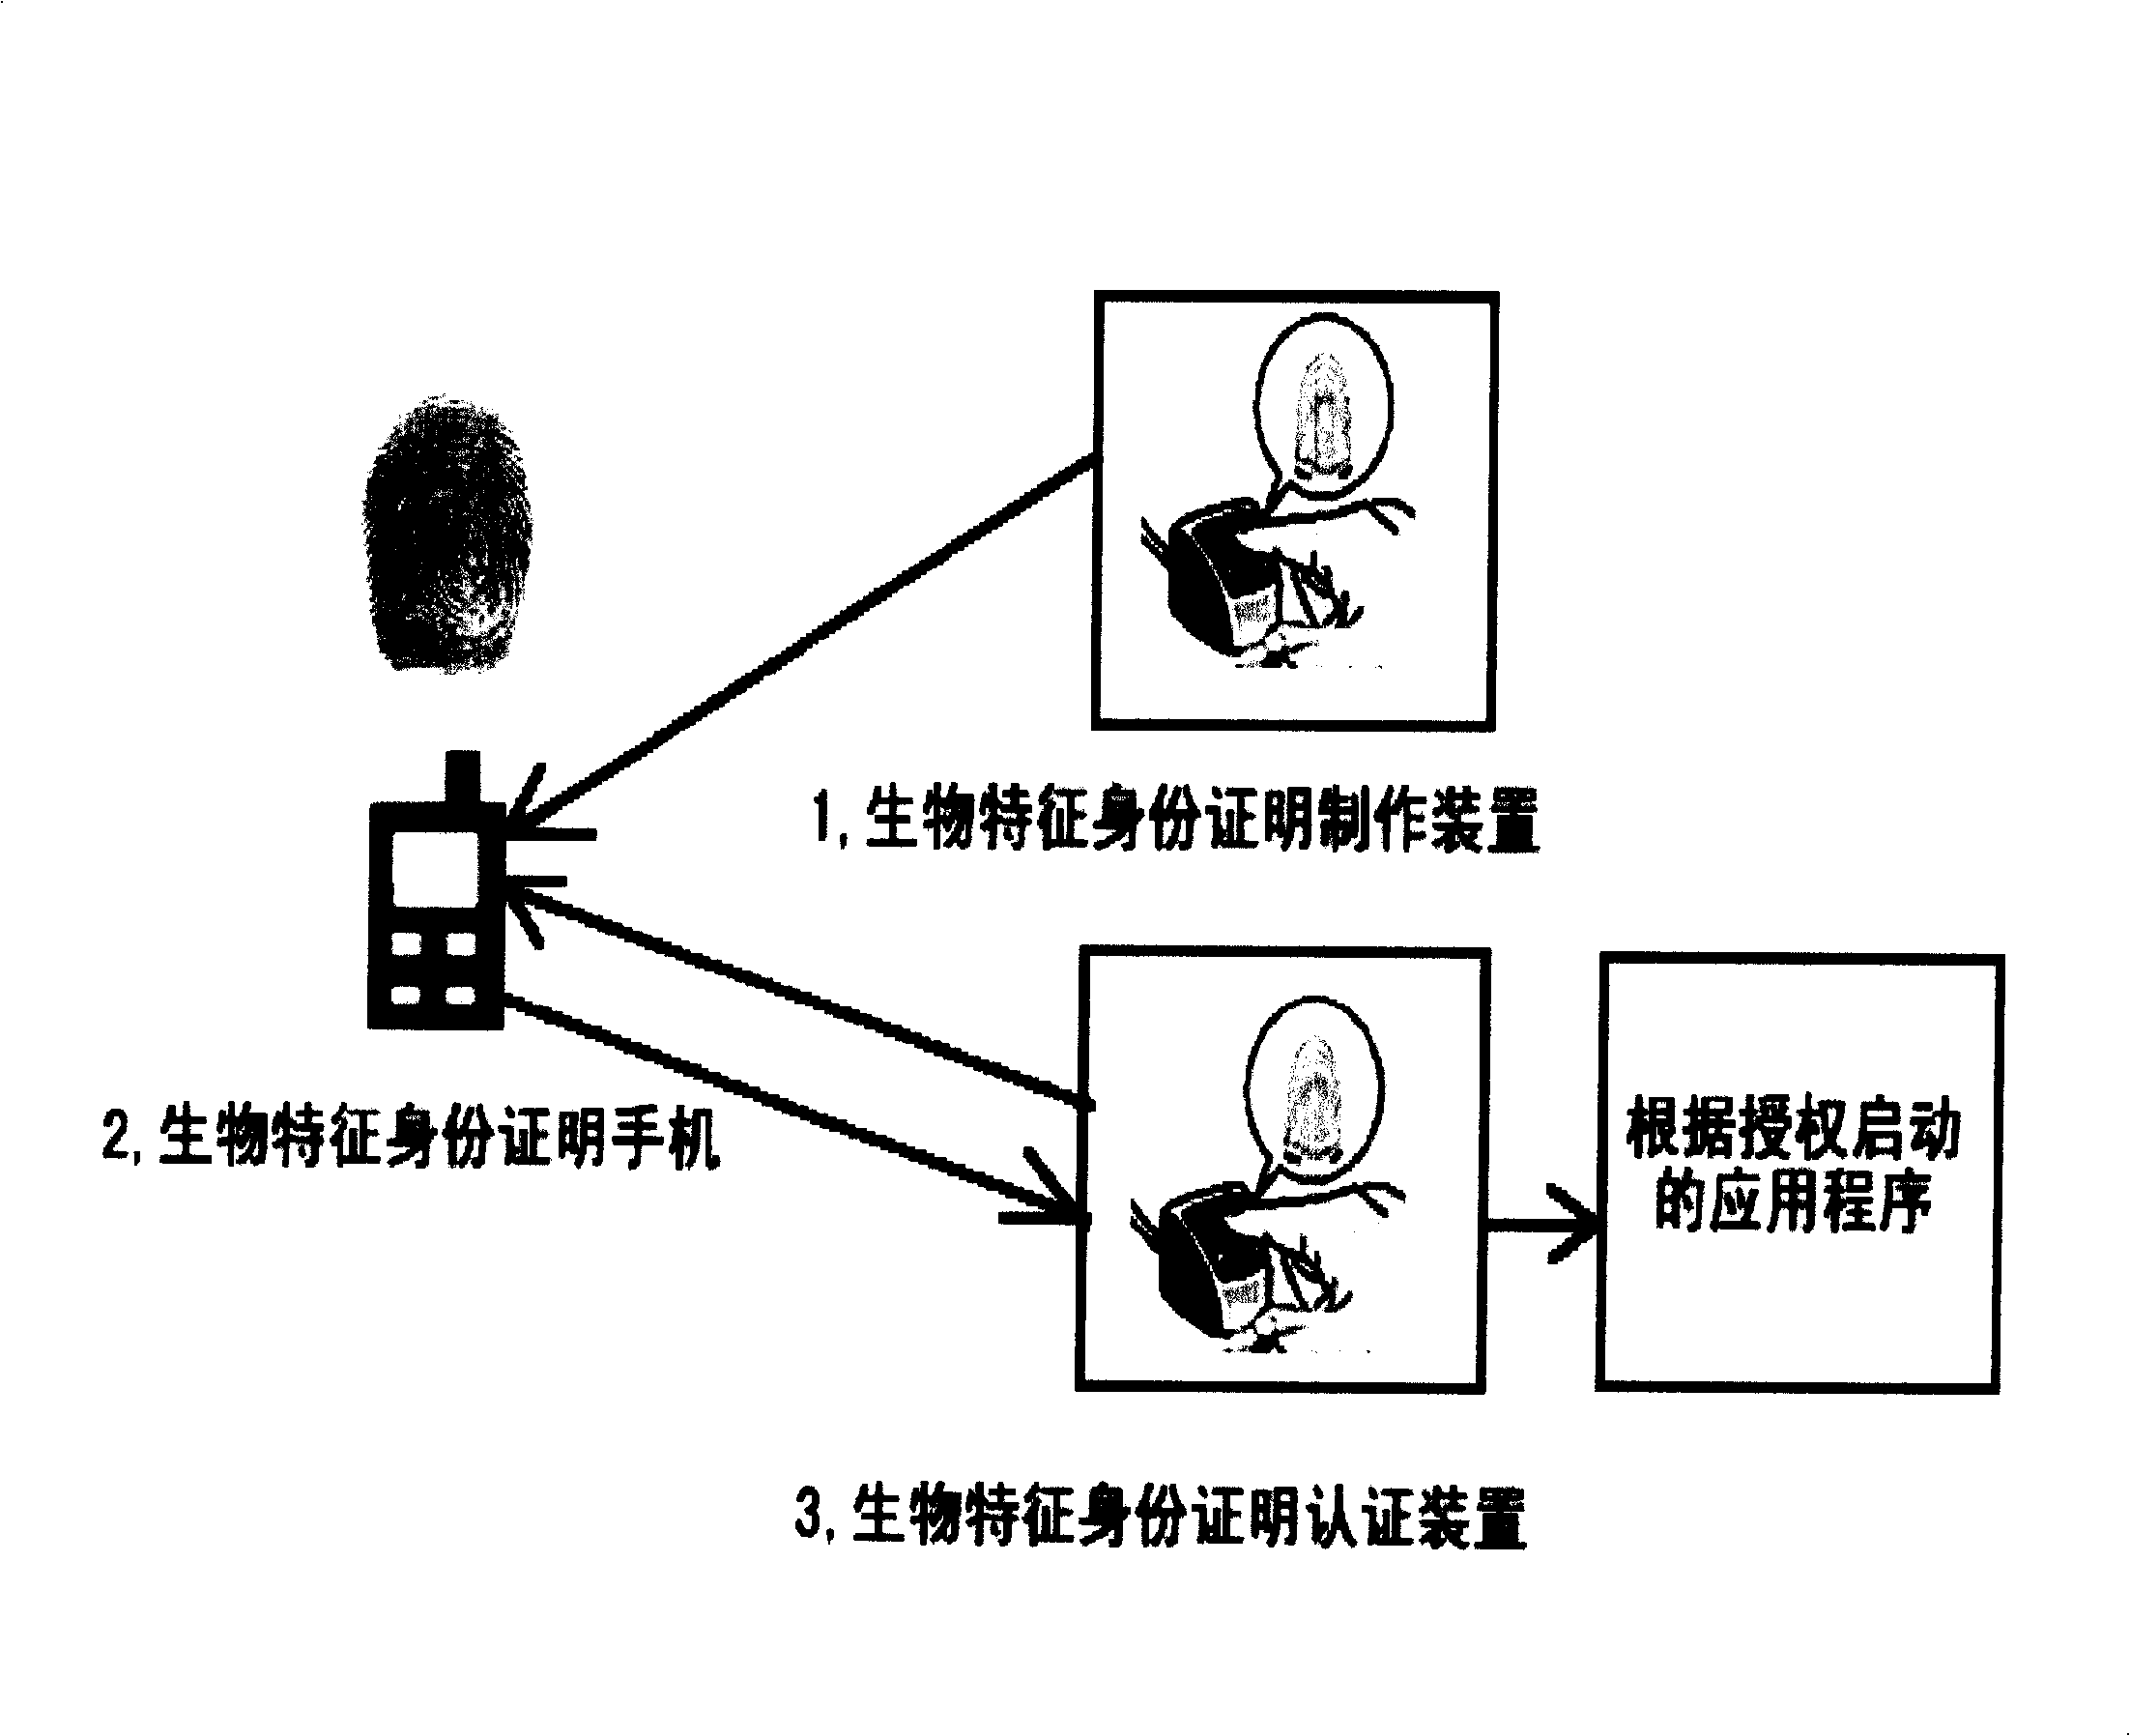 Mobile phone biological identity certification production and authentication method, and its authentication system